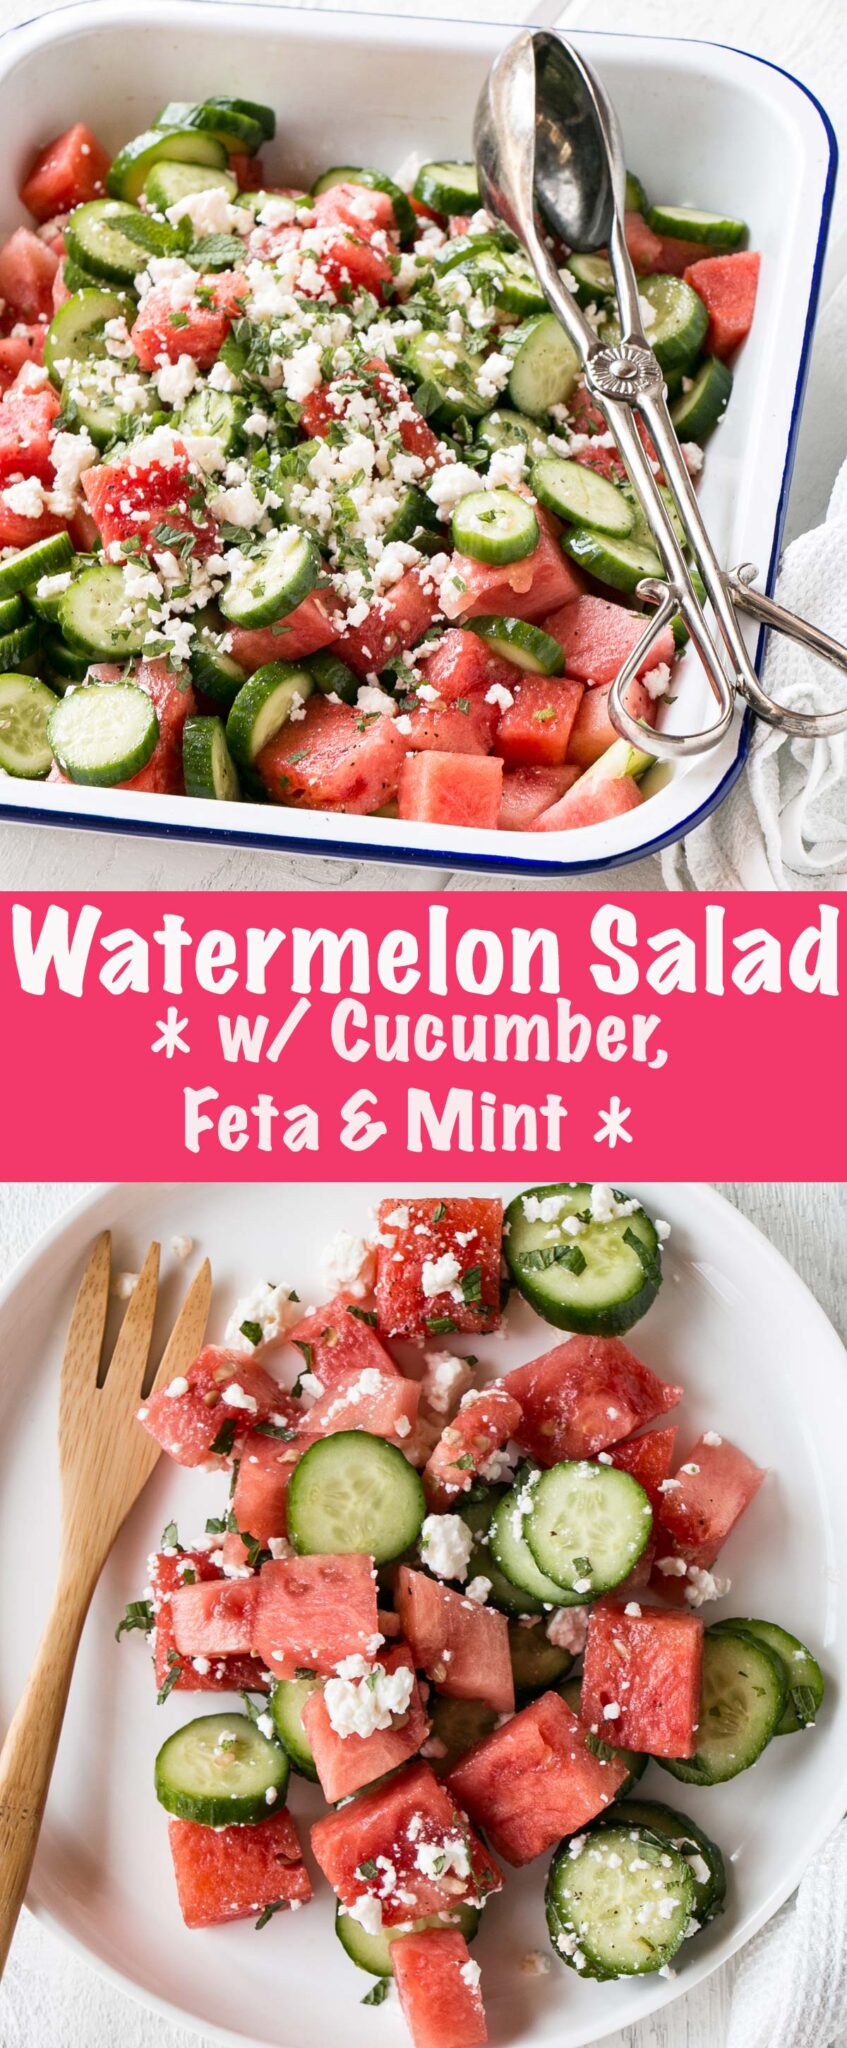 Refreshing, sweet, and crowd-pleasing Watermelon Salad with Cucumber, Feta and Mint. Enjoyed by kids and adults alike with 6 simple ingredients, this 10 minute salad is not to be missed!  via @mykitchenlove